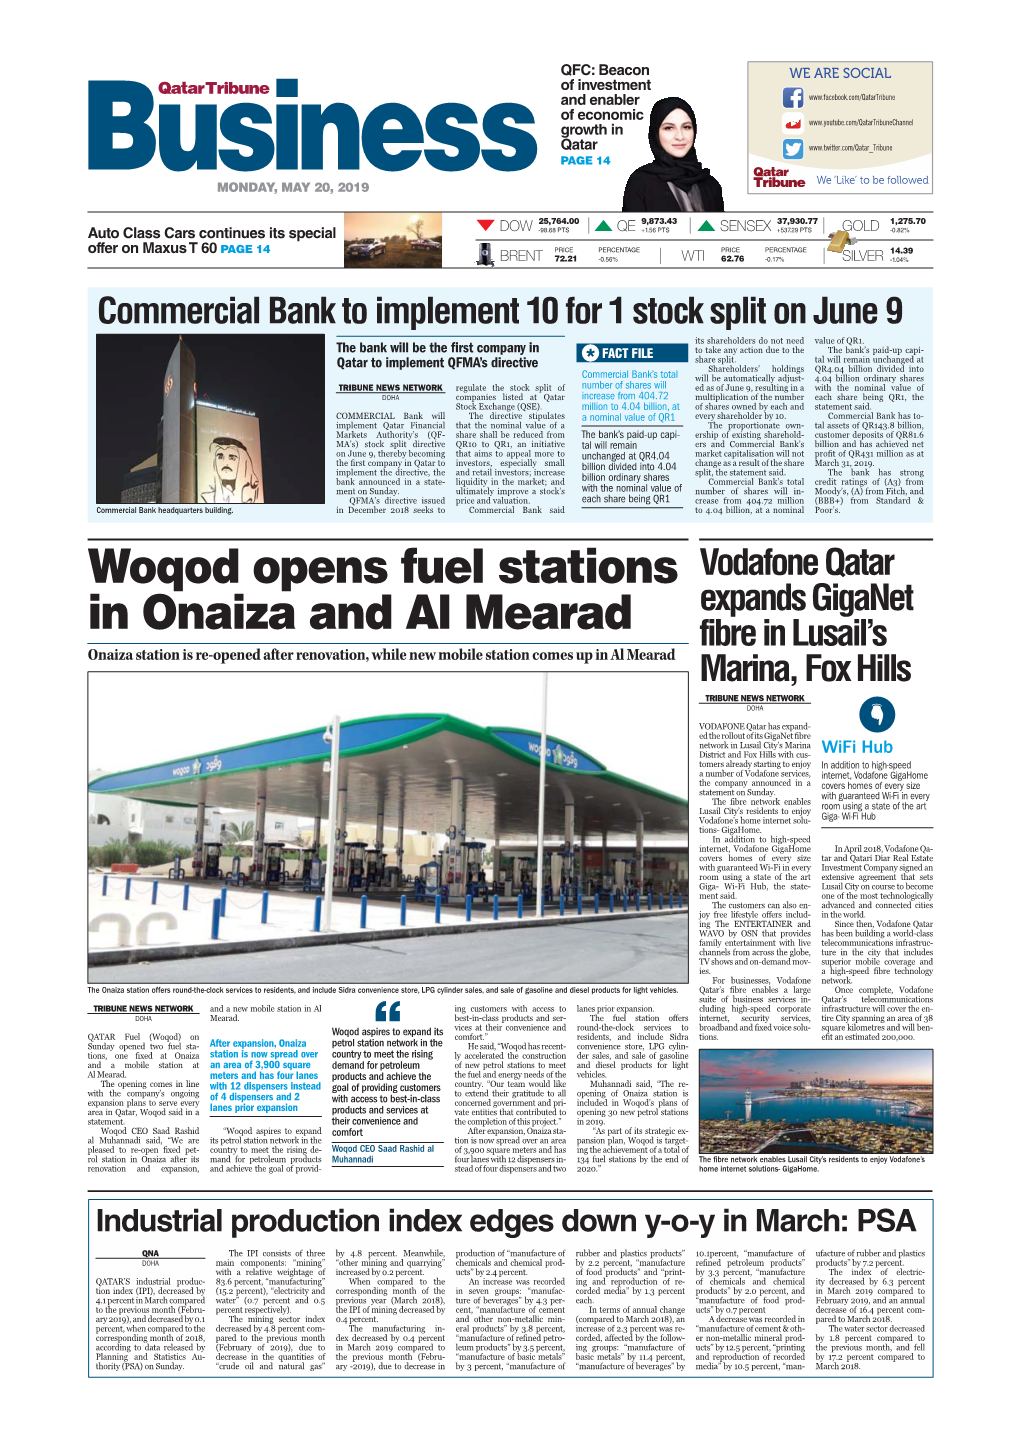 Woqod Opens Fuel Stations in Onaiza and Al Mearad